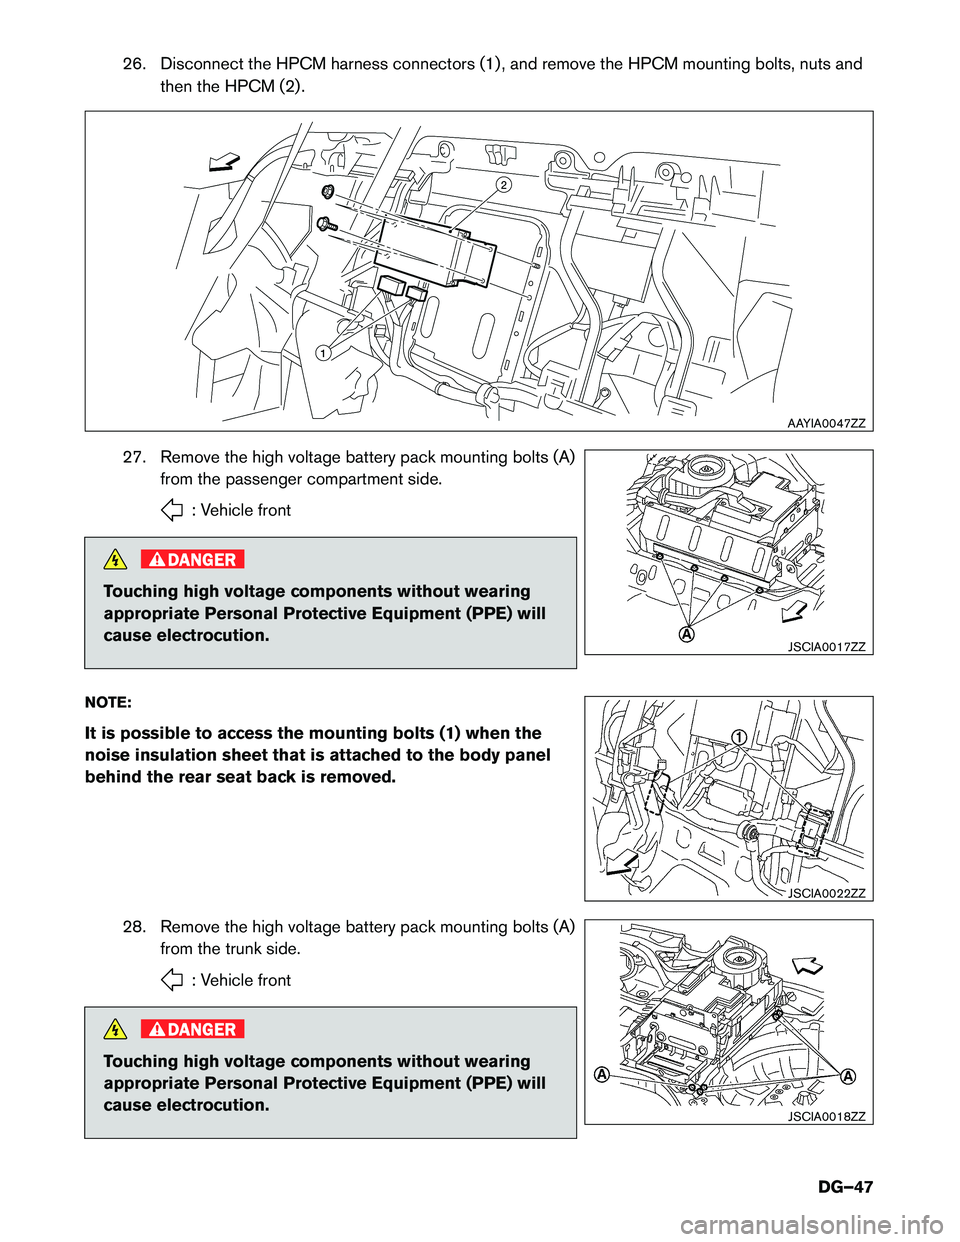 INFINITI Q70 HYBRID 2016  Dismantling Guide 26. Disconnect the HPCM harness connectors (1) , and remove the HPCM mounting bolts, nuts andthen the HPCM (2) .
27. Remove the high voltage battery pack mounting bolts (A) from the passenger compartm